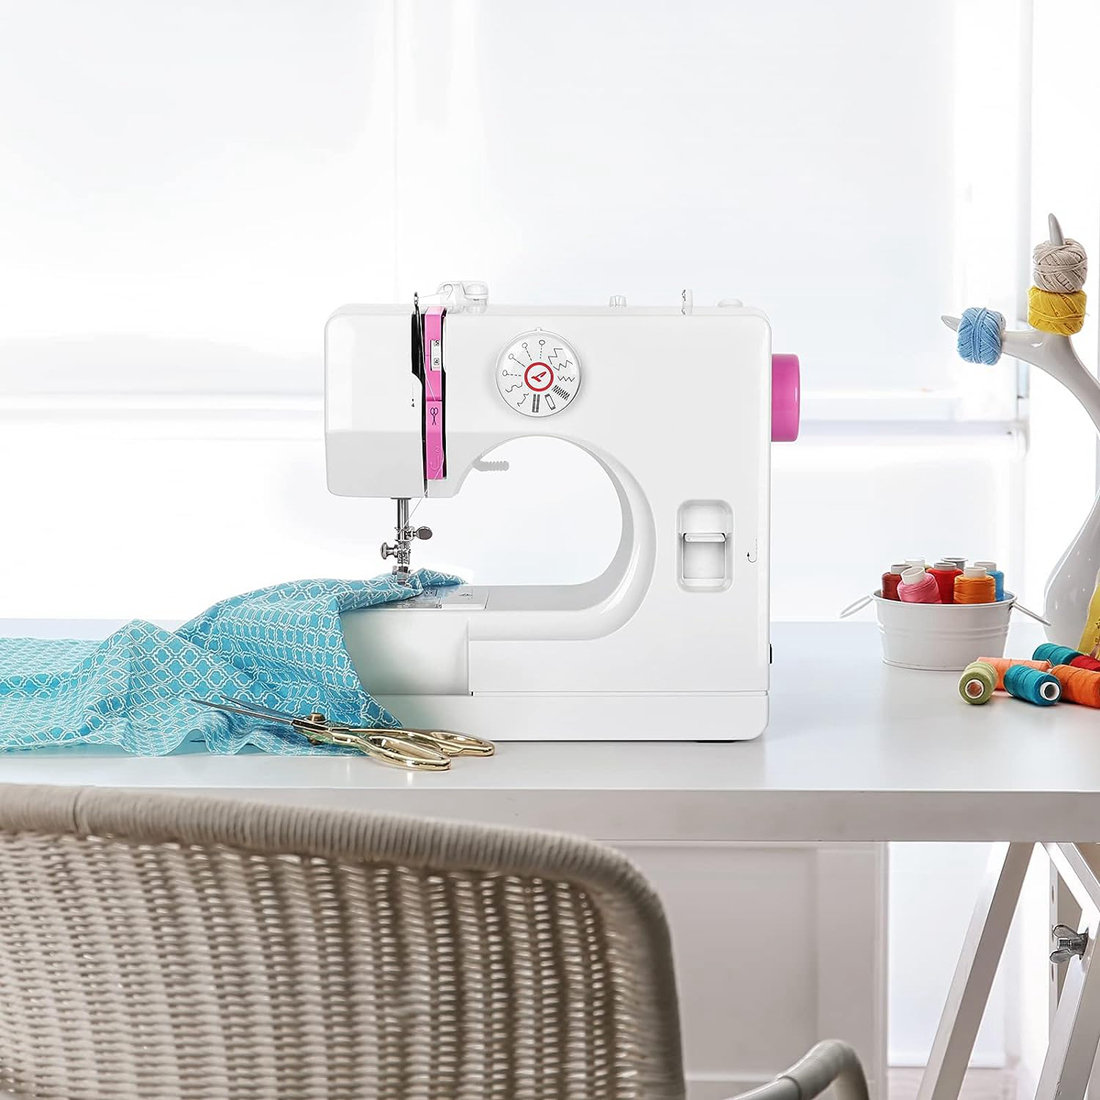 HTVRONT Electric Sewing Machine Crafting Mending Machine for